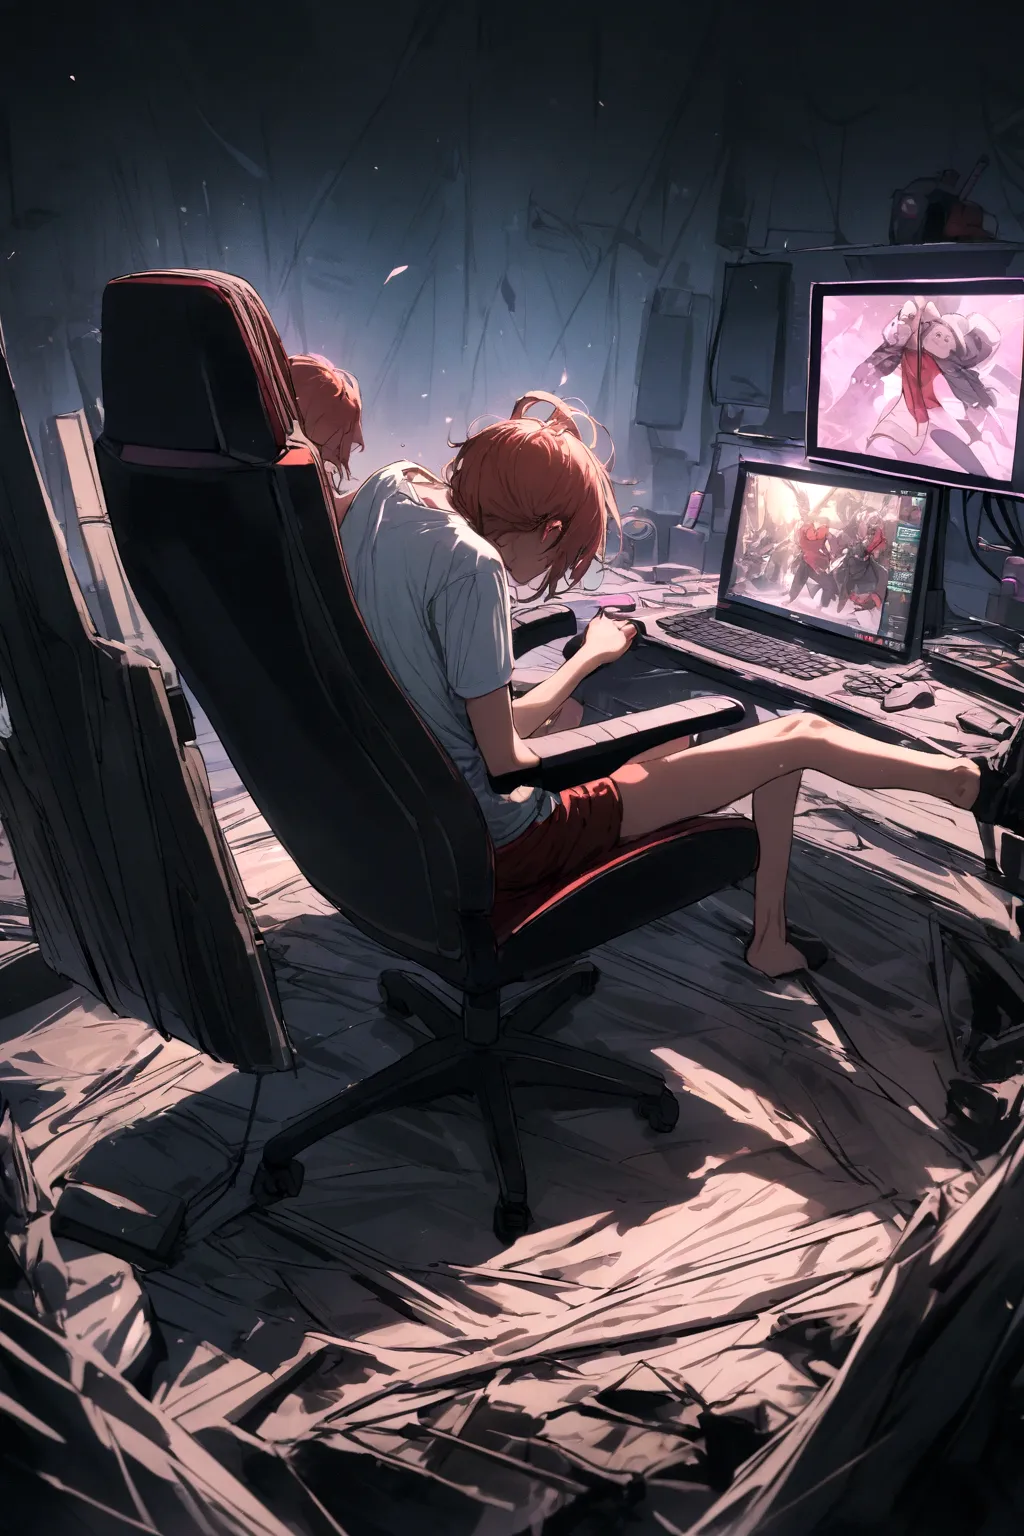 A Power,Sitting on a gaming chair,playing on a PC,wearing a shirt written, Harl,in the middle.